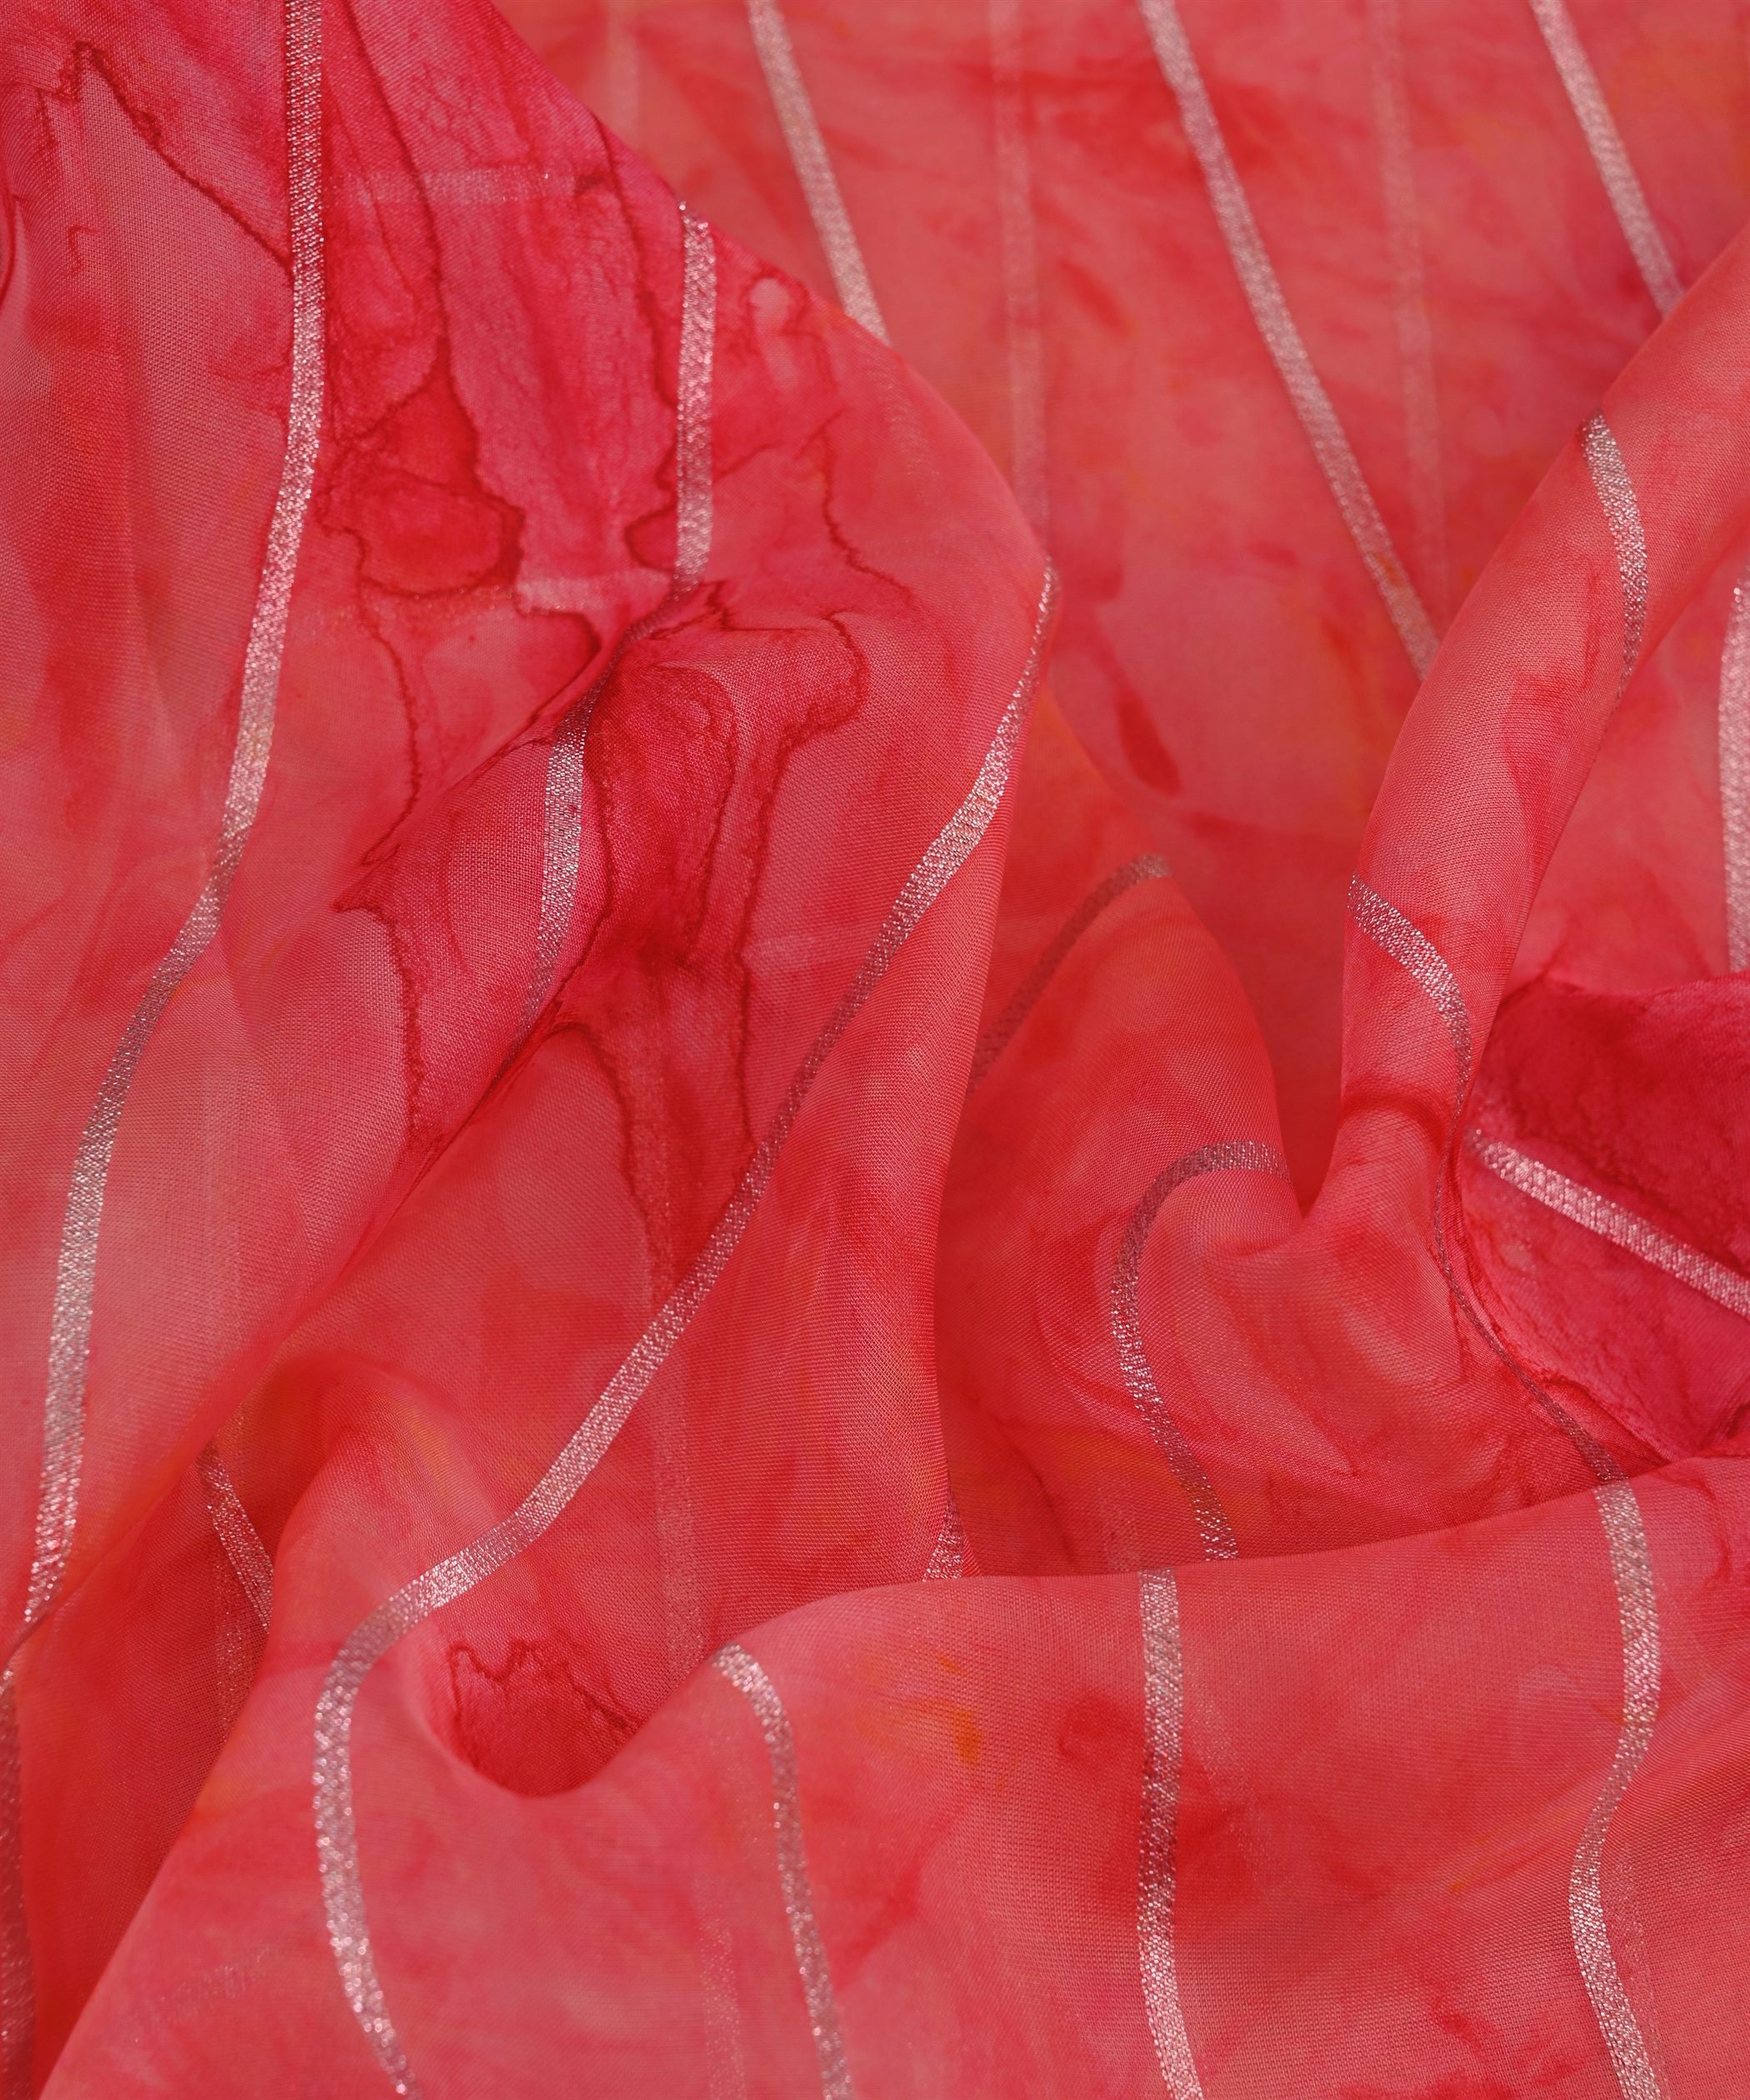 Pink Organza Fabric with Silver Lining